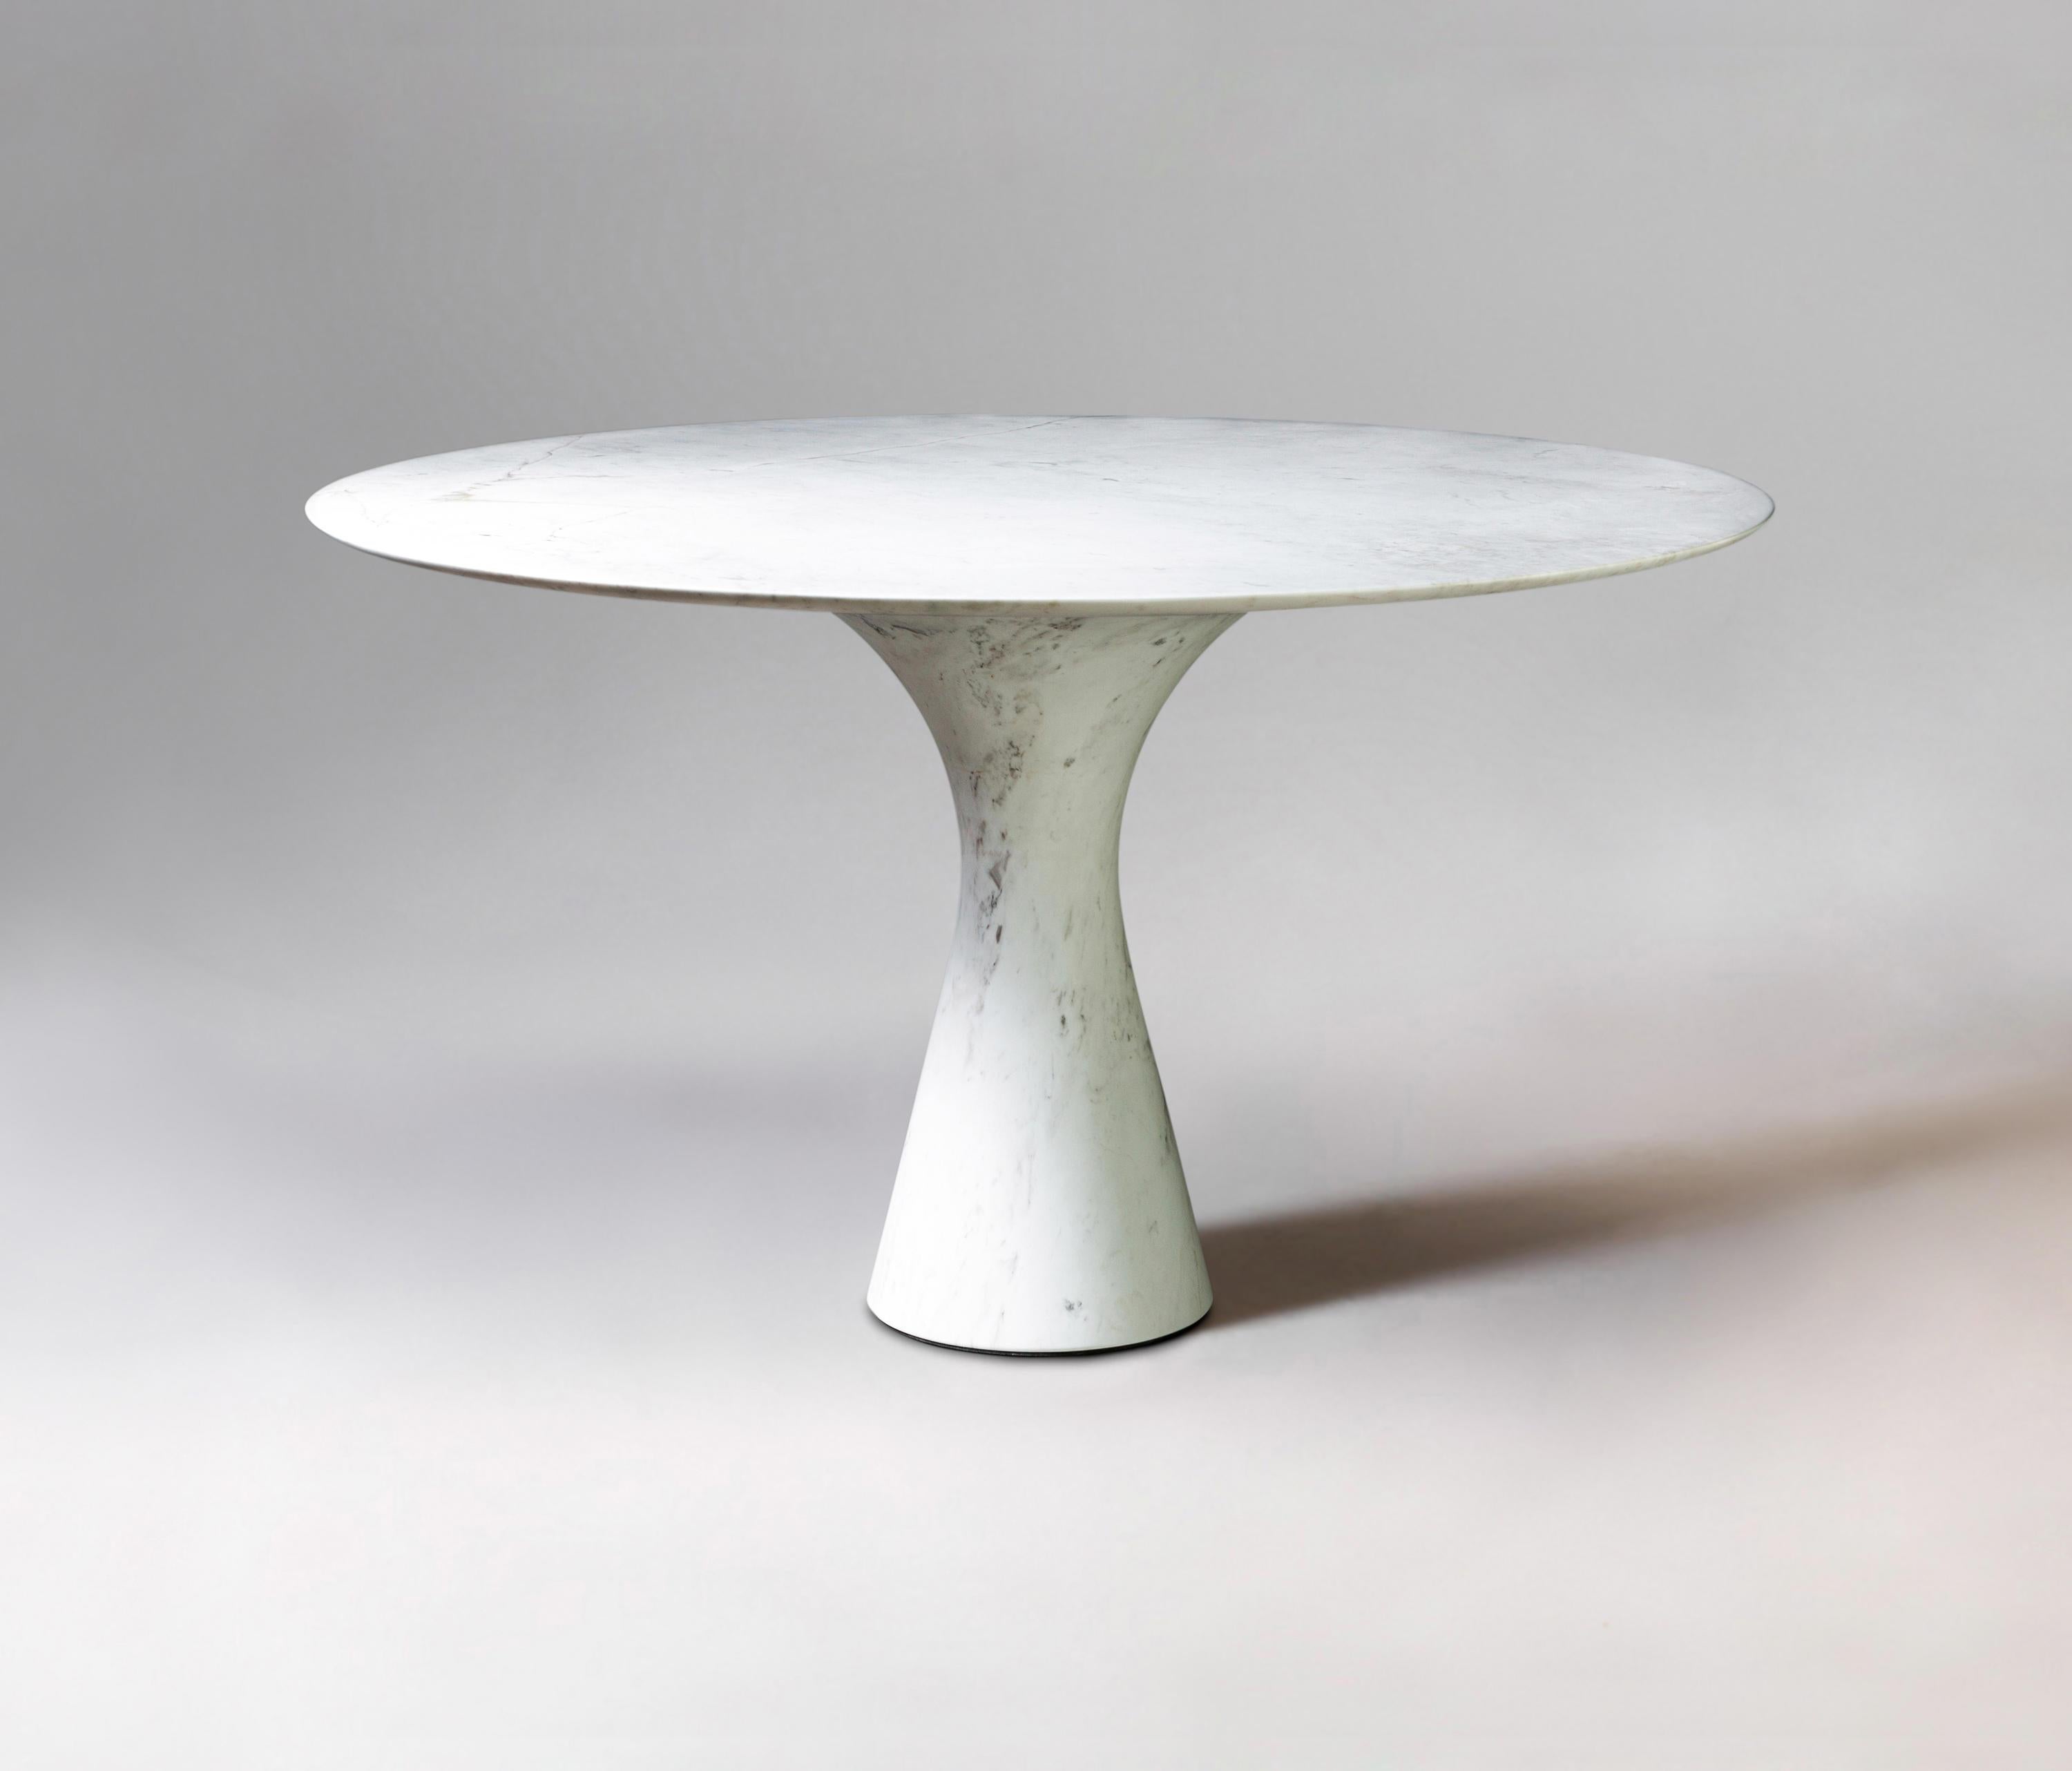 Bianco Statuarietto Refined Contemporary Marble Dining Table 160/75 For Sale 1